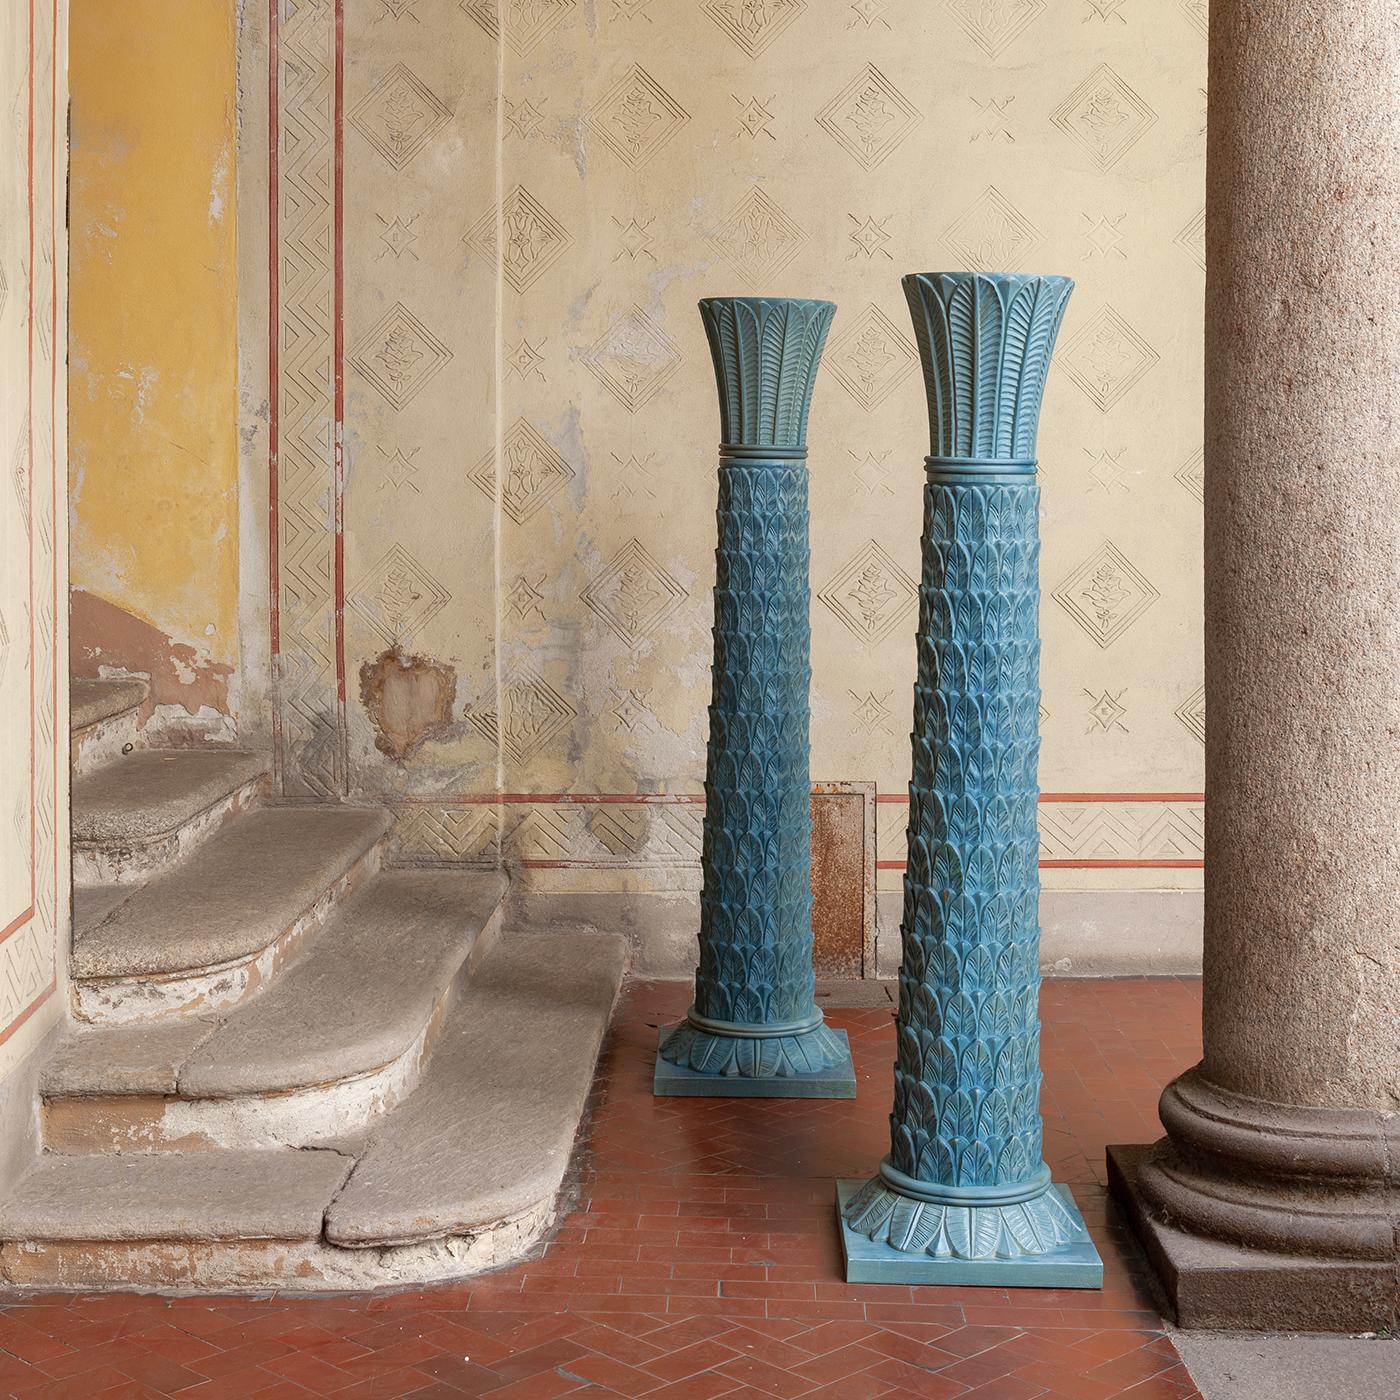 Merging modern techniques and antique carving woodworking traditions, this decorative column draws inspiration from a combination of 1920s Art Deco flair and Renaissance and Ancient Egyptian art, with colors inspired by the Basilica of Saint Francis